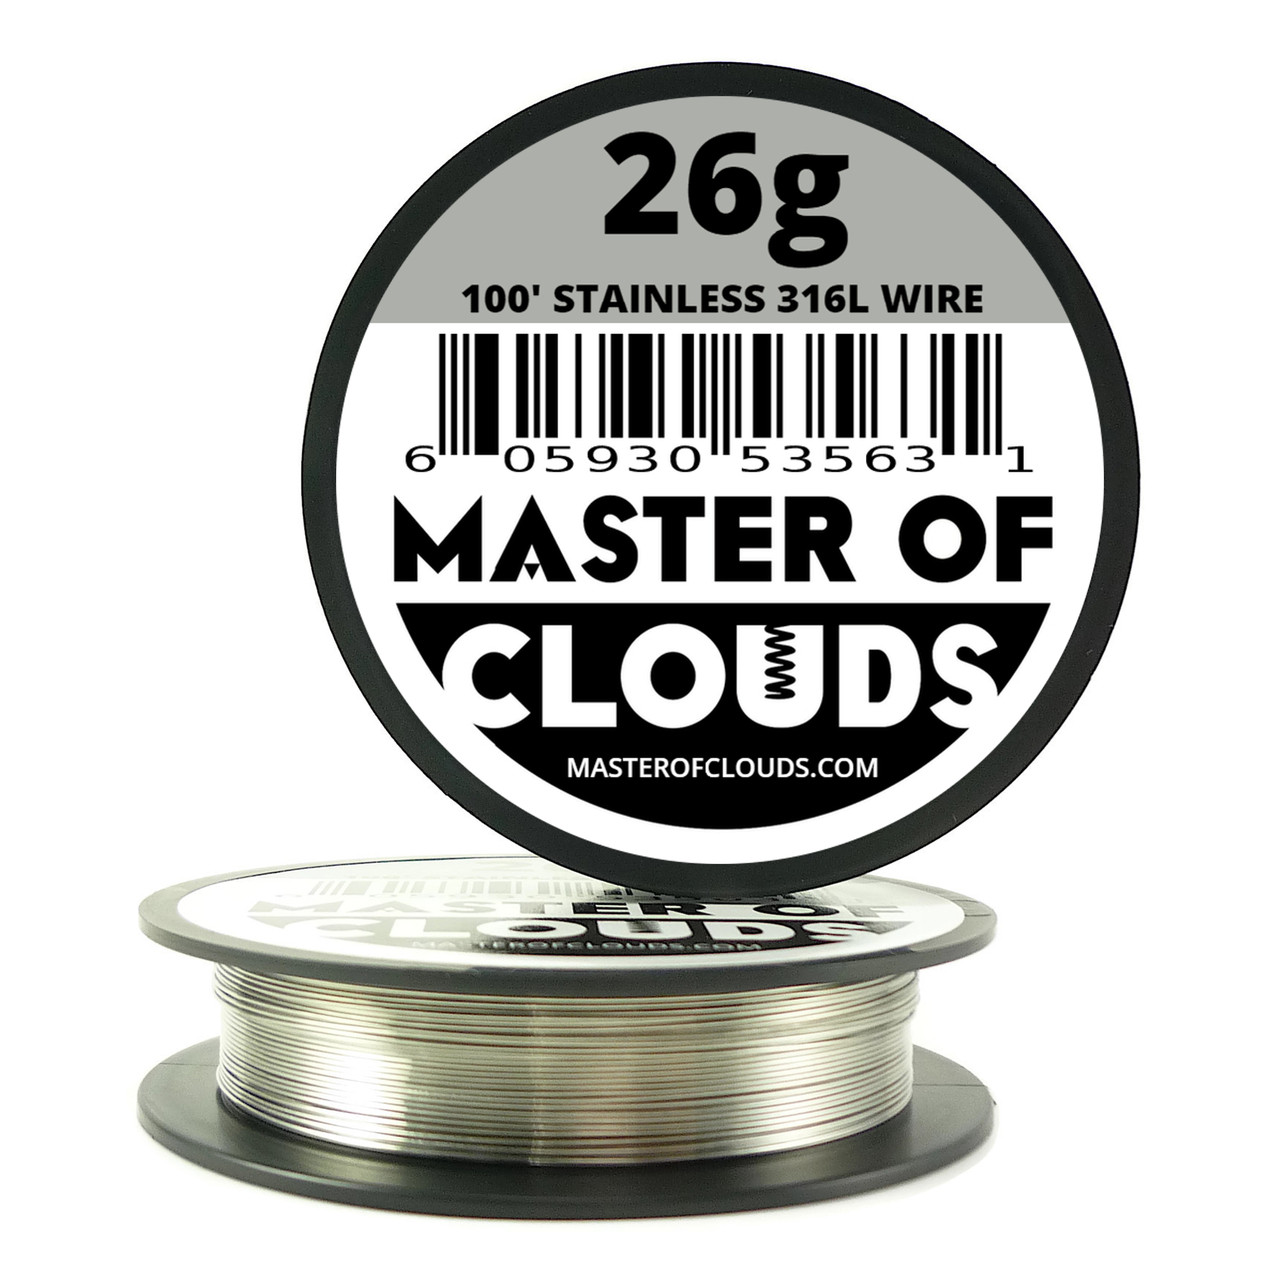 Stainless Steel 316L - 100 ft 26 Gauge Wire - Master of Clouds